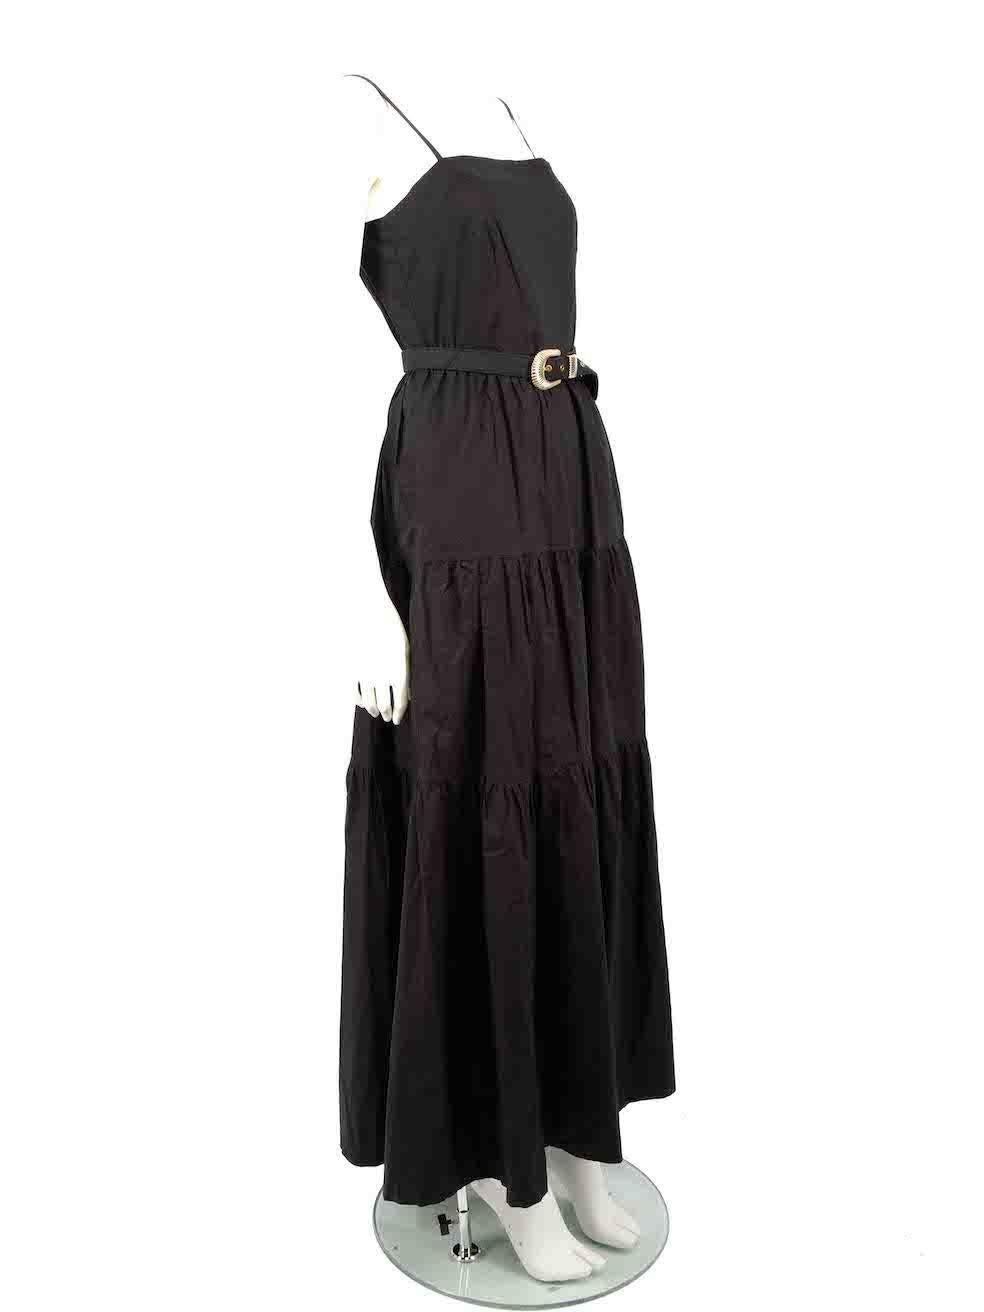 CONDITION is Very good. Hardly any visible wear to dress is evident on this used Nicholas designer resale item.
 
 
 
 Details
 
 
 Black
 
 Cotton
 
 Dress
 
 Maxi
 
 Sleeveless
 
 Adjustable shoulder straps
 
 Square neck
 
 Belted
 
 2x Side